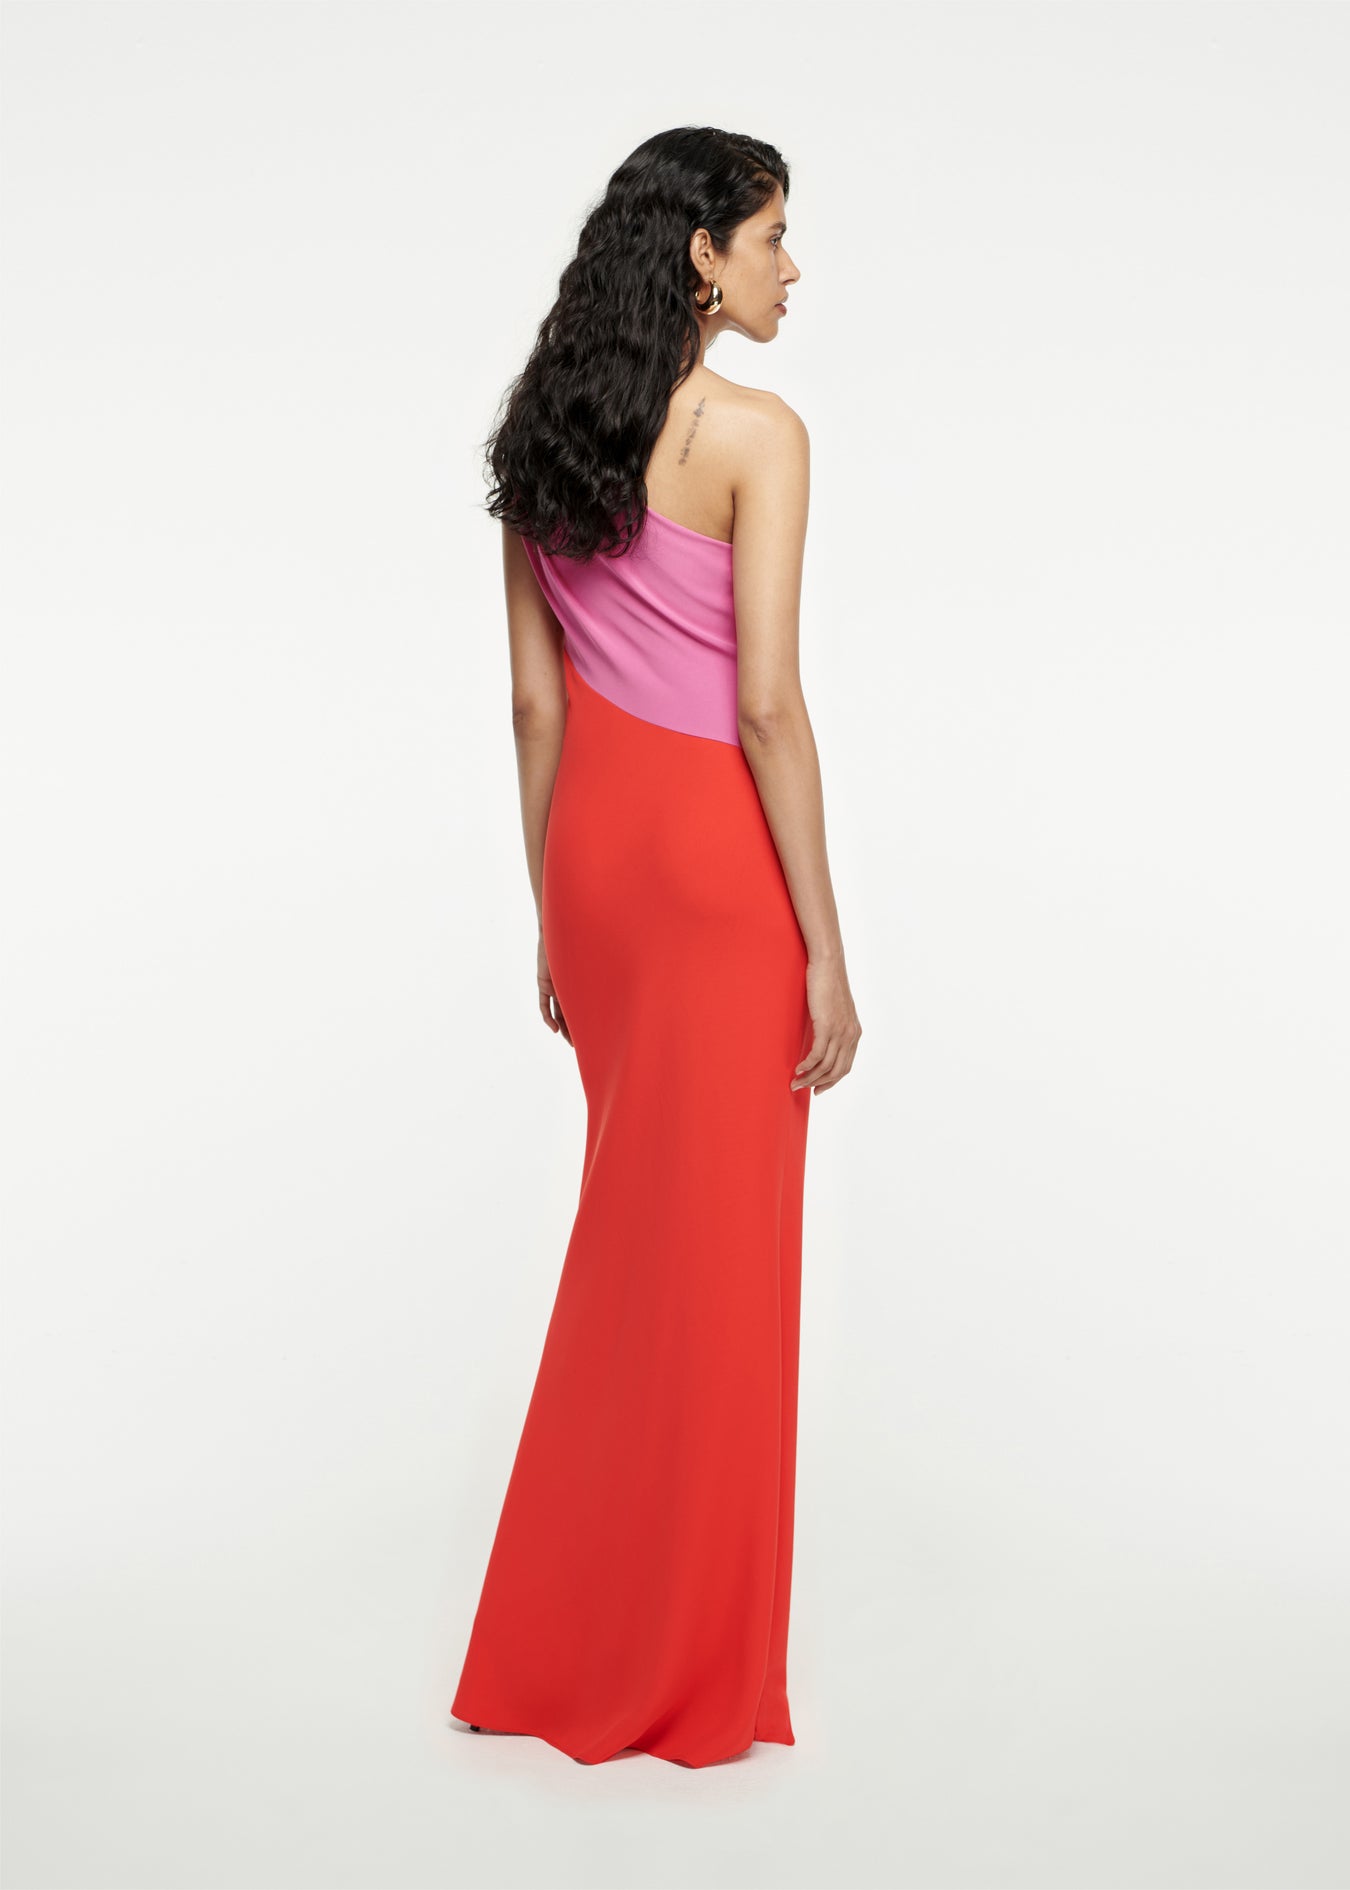 The back of a woman wearing the Asymmetric Stretch-Cady Maxi Dress in Red